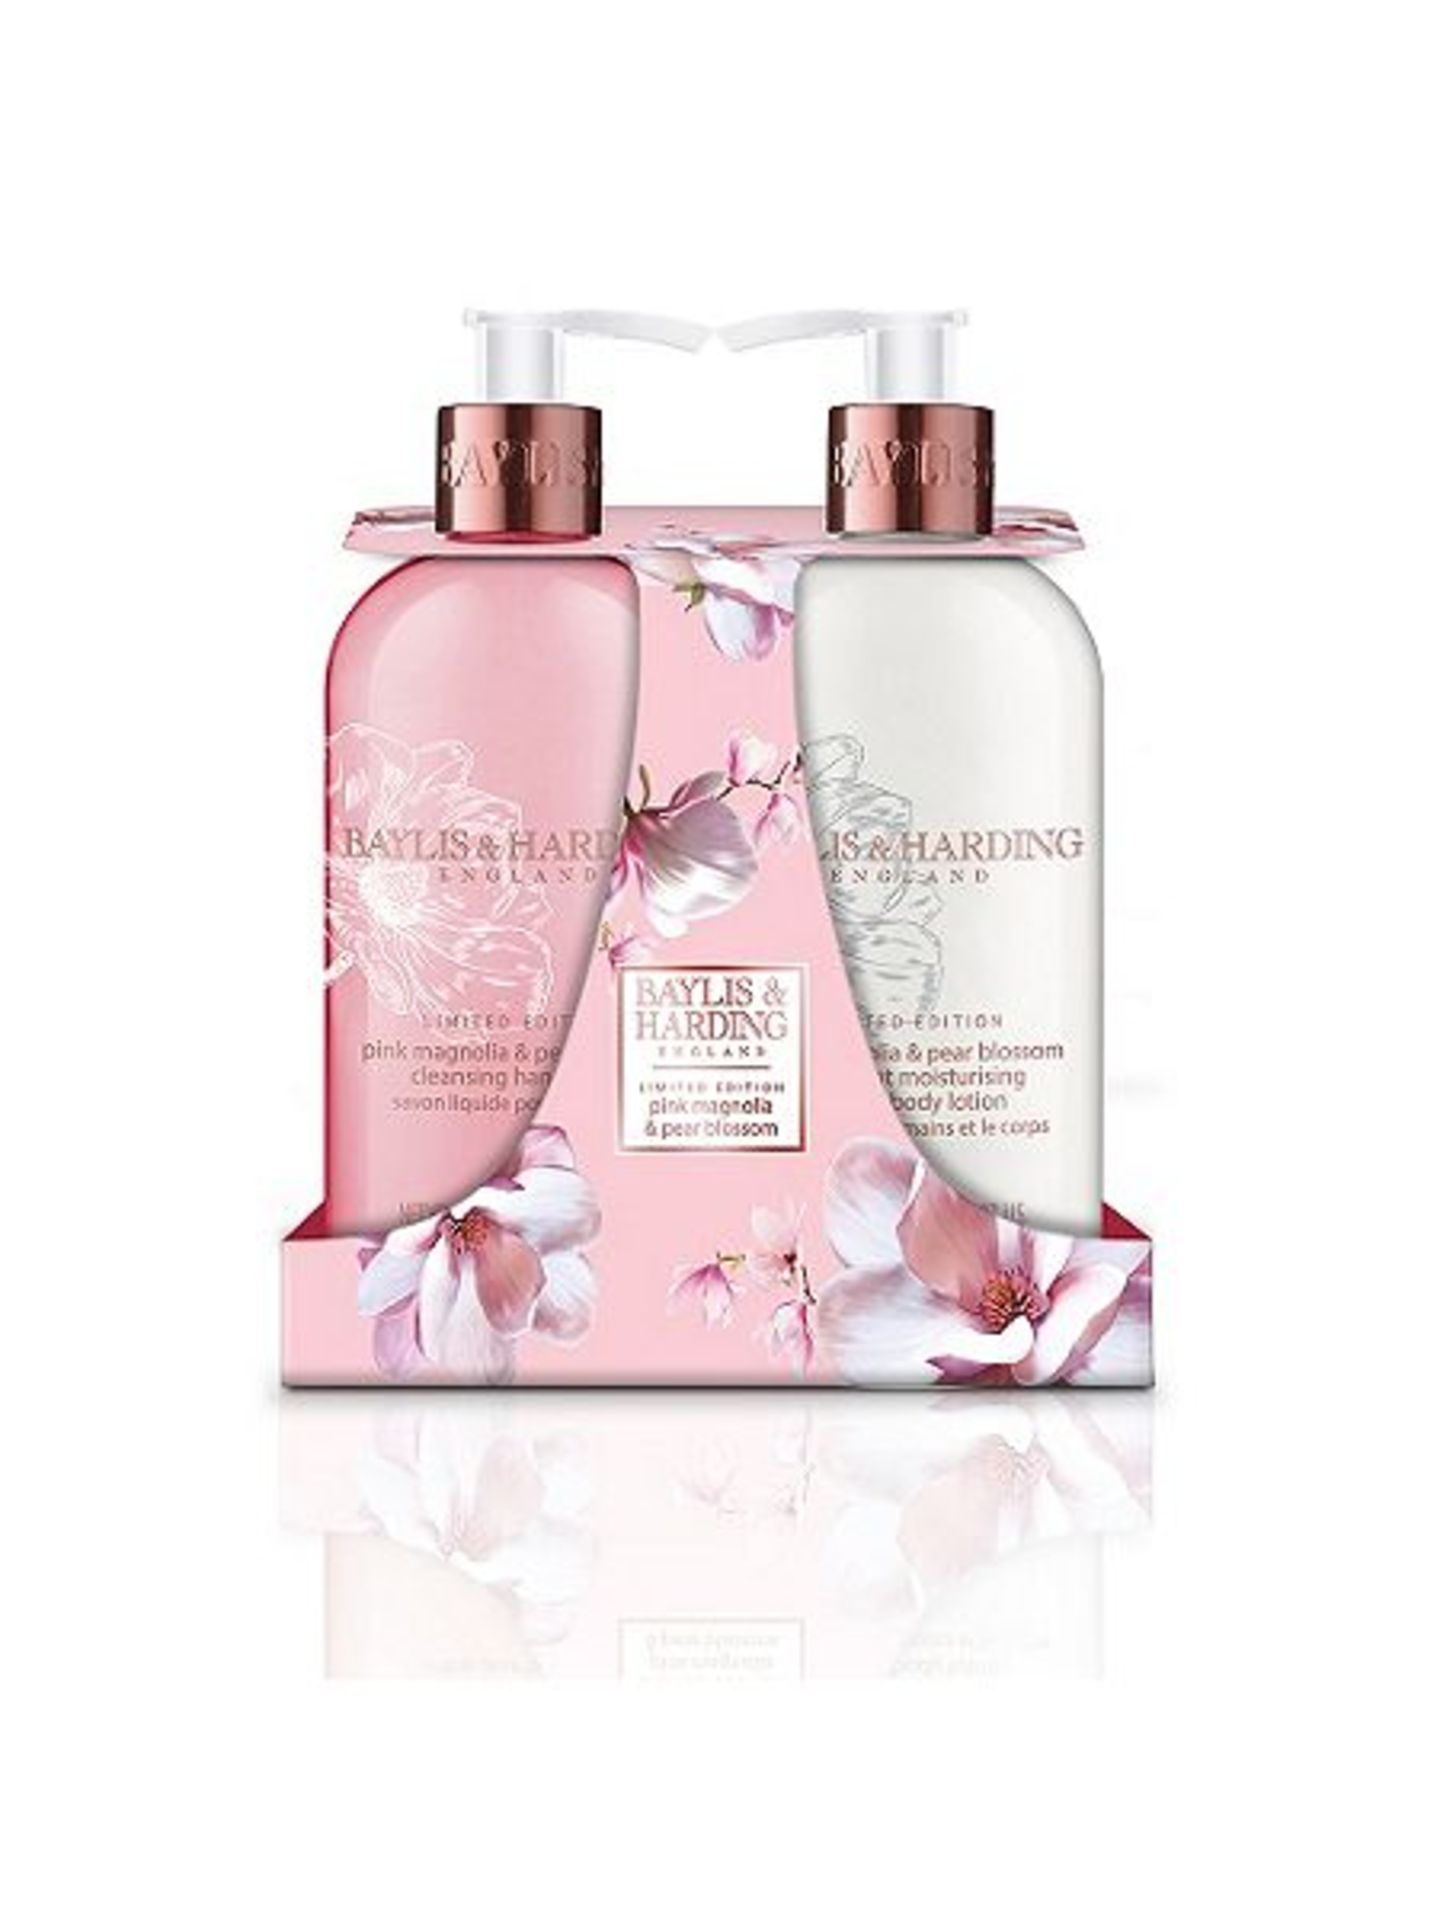 V Brand New Baylis & Harding Limited Edition Pink Magnolia And Pear Blossom Twin 300ml Pump Bottle